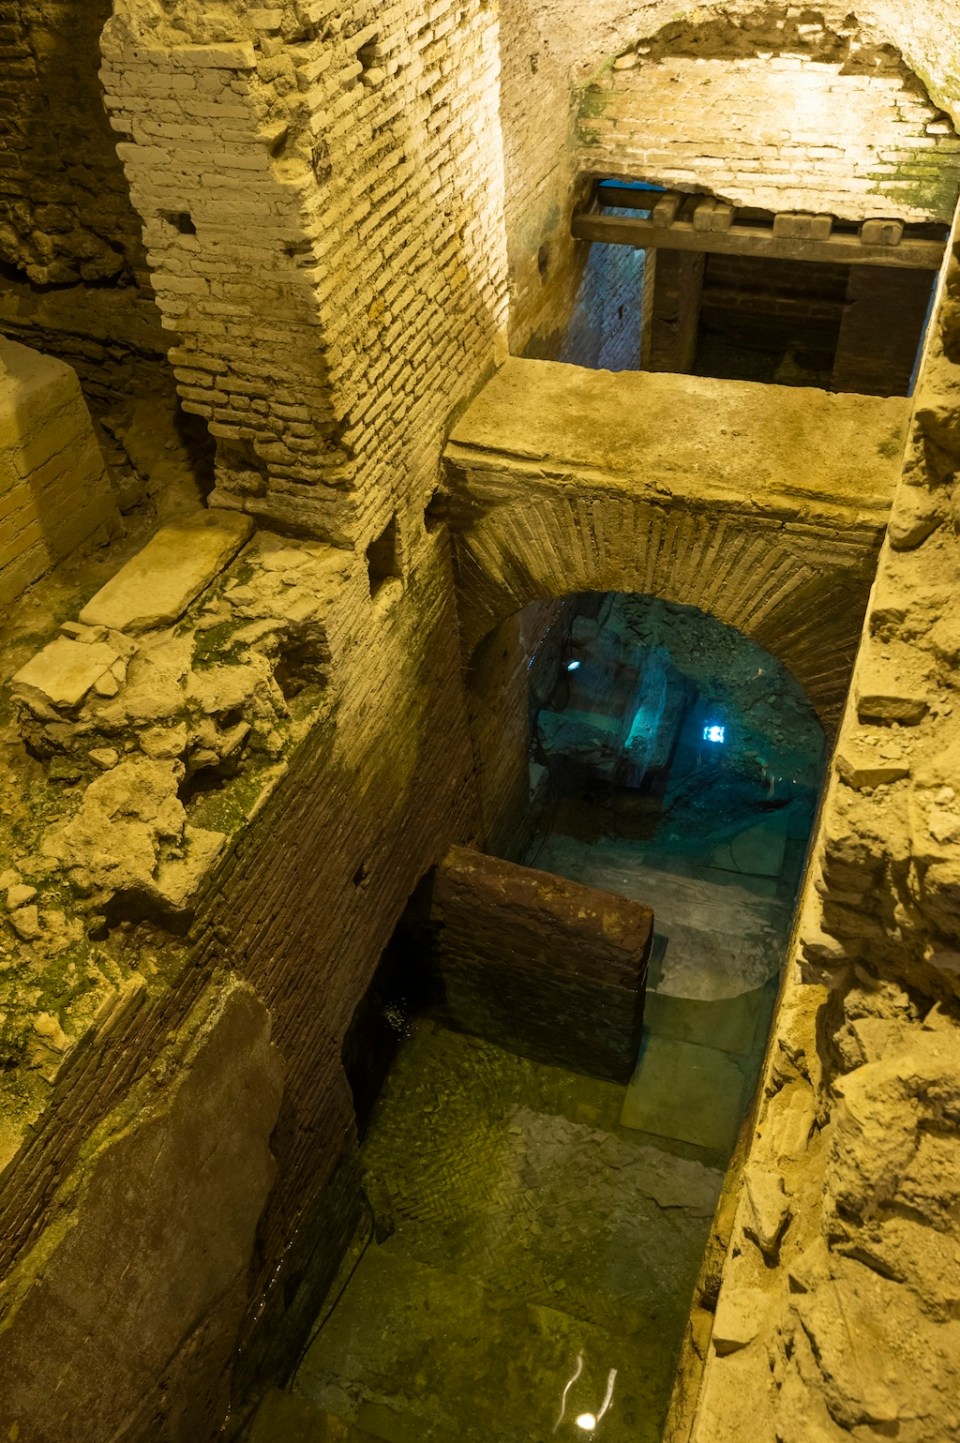 Vicus Caprarius, the City of Water with the structures of an imperial era domus, the path of the Virgin Aqueduct and the suggestive finds, found near the Trevi Fountain Rome Italy.